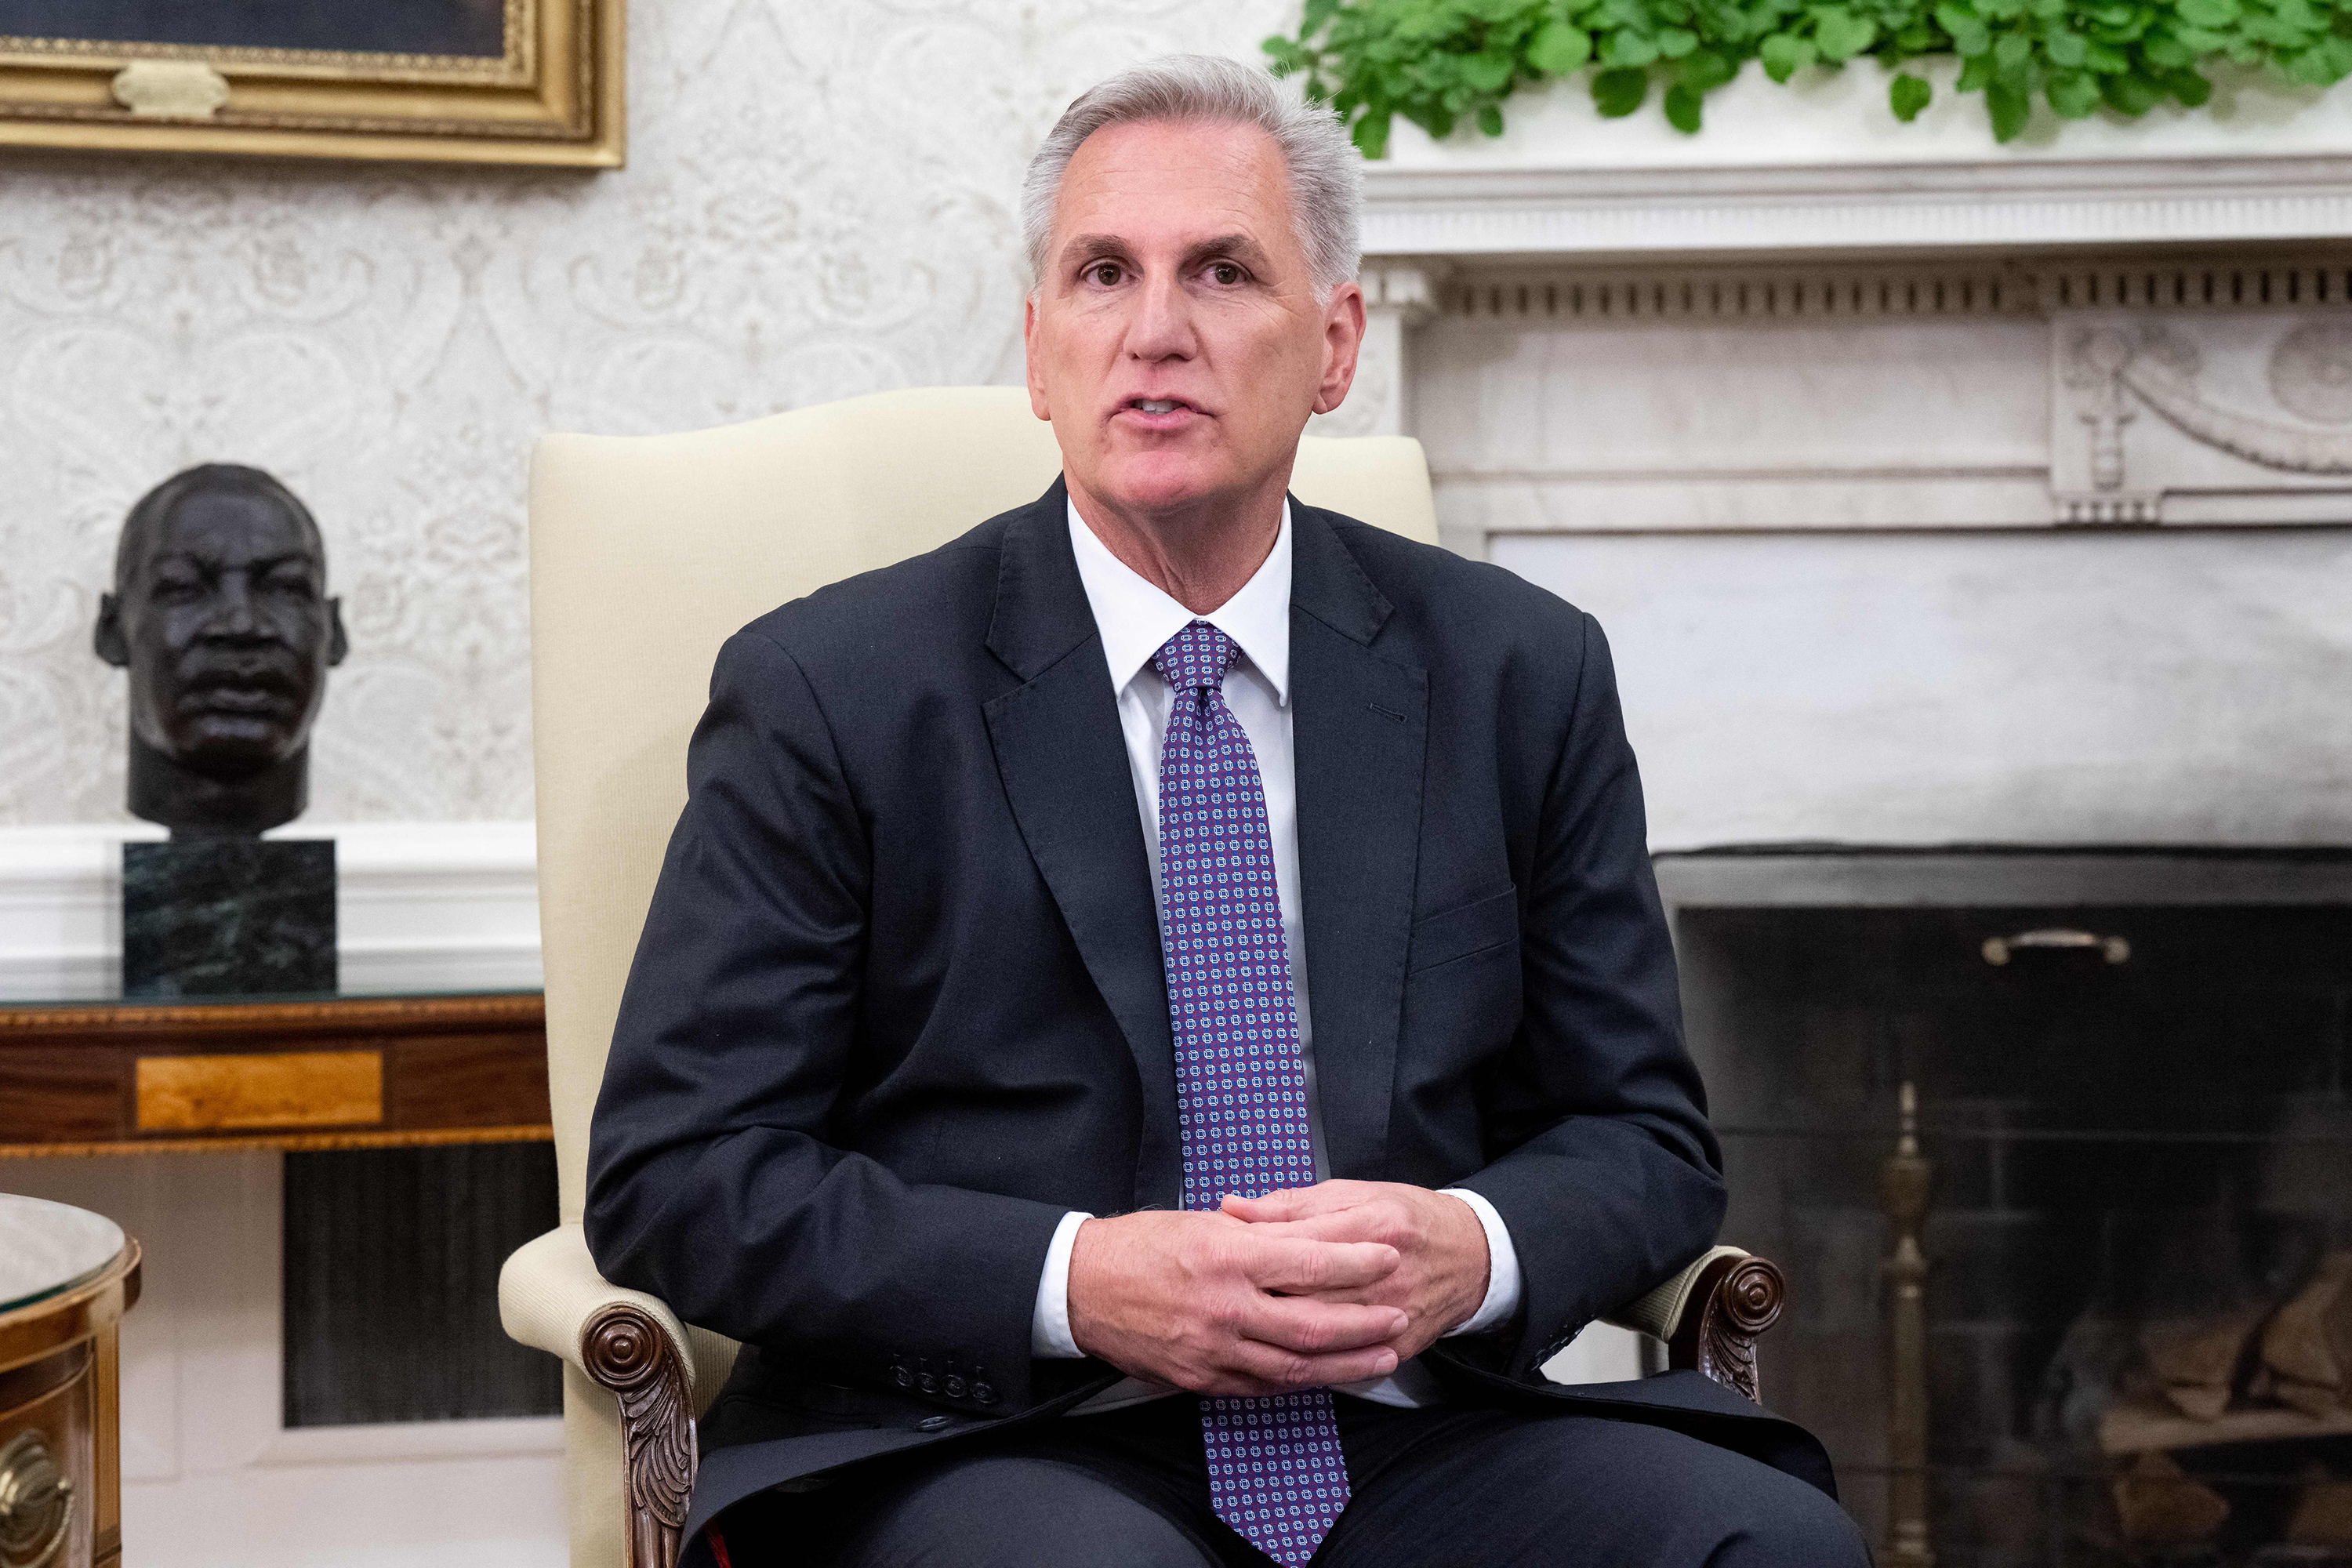 House Speaker Kevin McCarthy (R-CA) speaks during a meeting on the debt ceiling with President Joe Biden in the Oval Office of the White House in Washington, DC, on May 22.